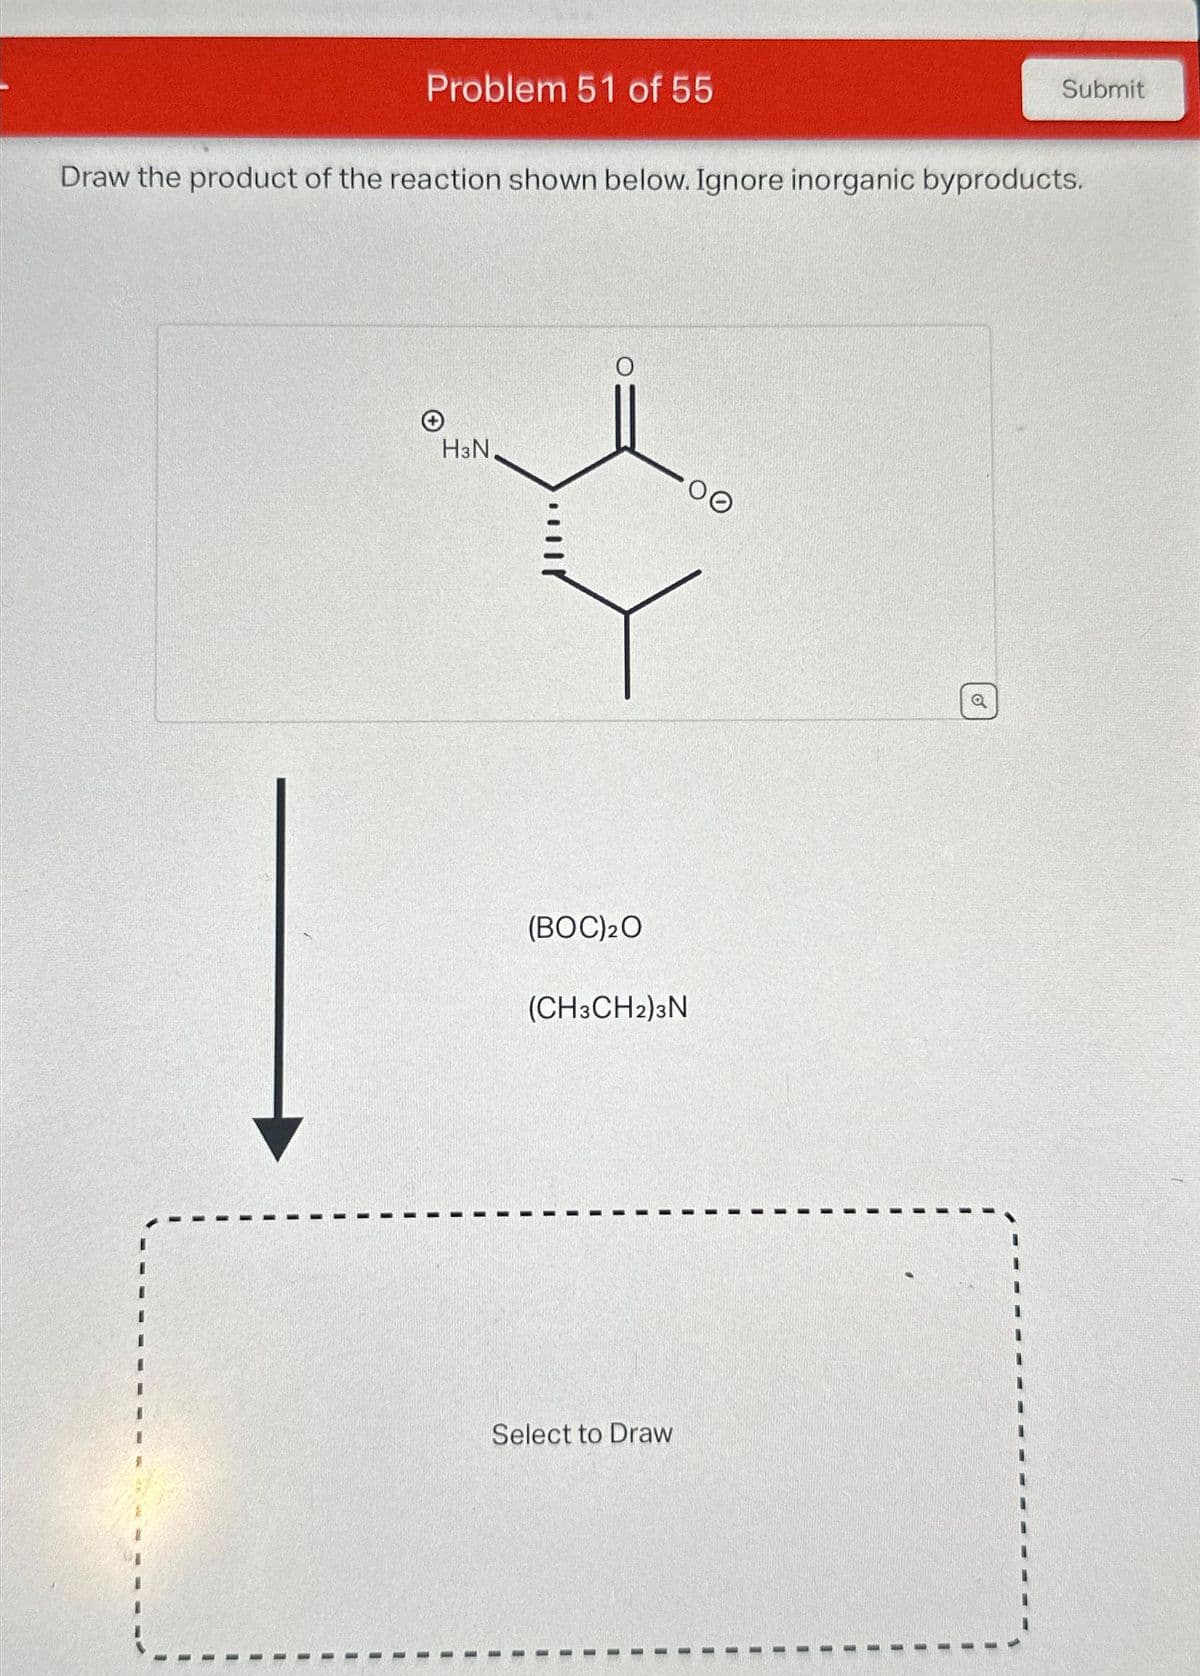 Problem 51 of 55
Draw the product of the reaction shown below. Ignore inorganic byproducts.
H3N.
(BOC) 20
(CH3CH2)3N
Select to Draw
Submit
o